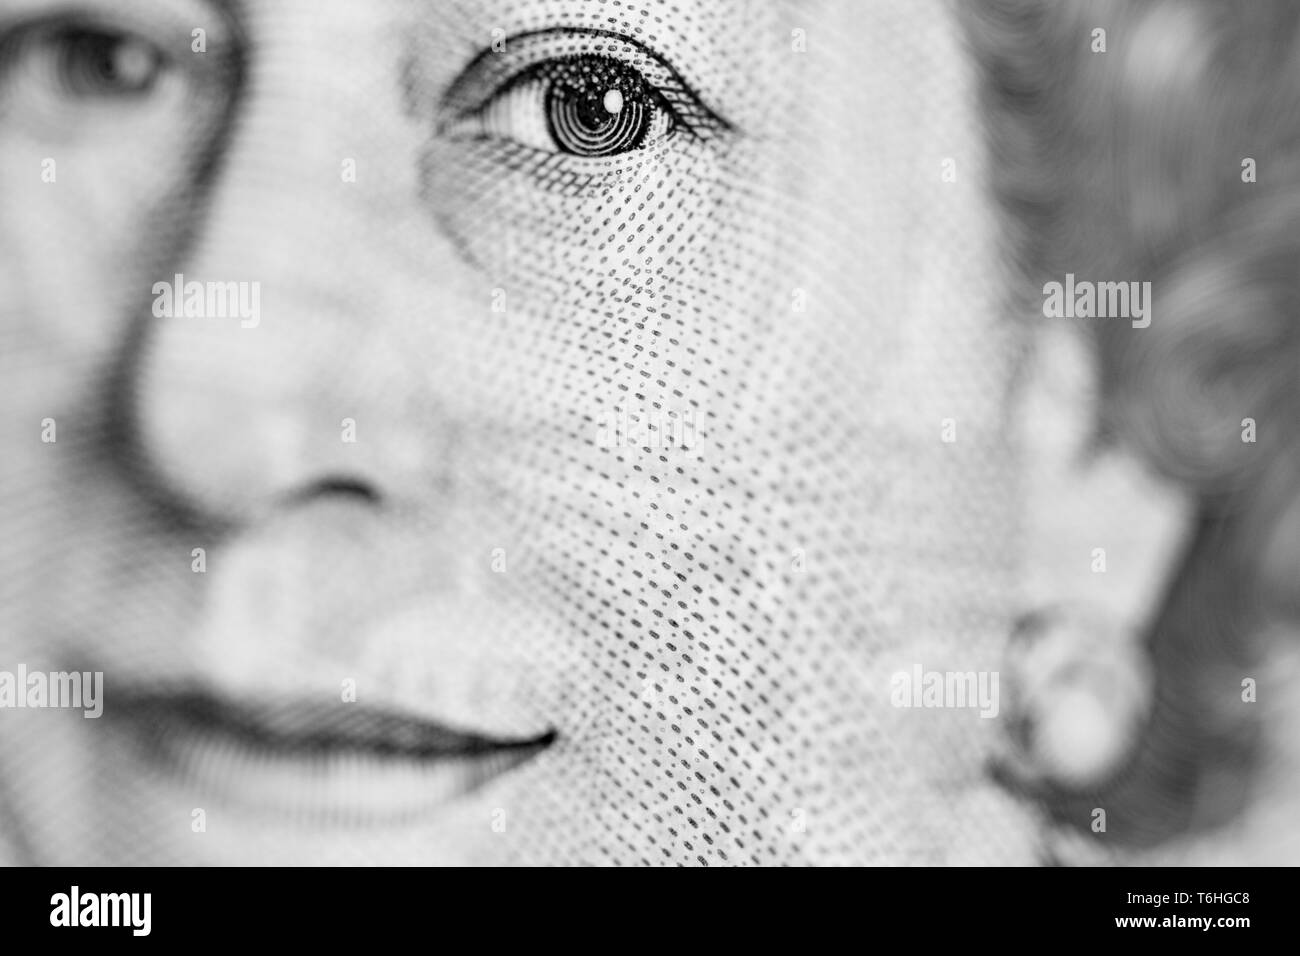 Close-up, macro photo of a piece of £10 banknote. Ten pounds sterling. Portrait of Queen Elizabeth II, eye, mouth. Stock Photo